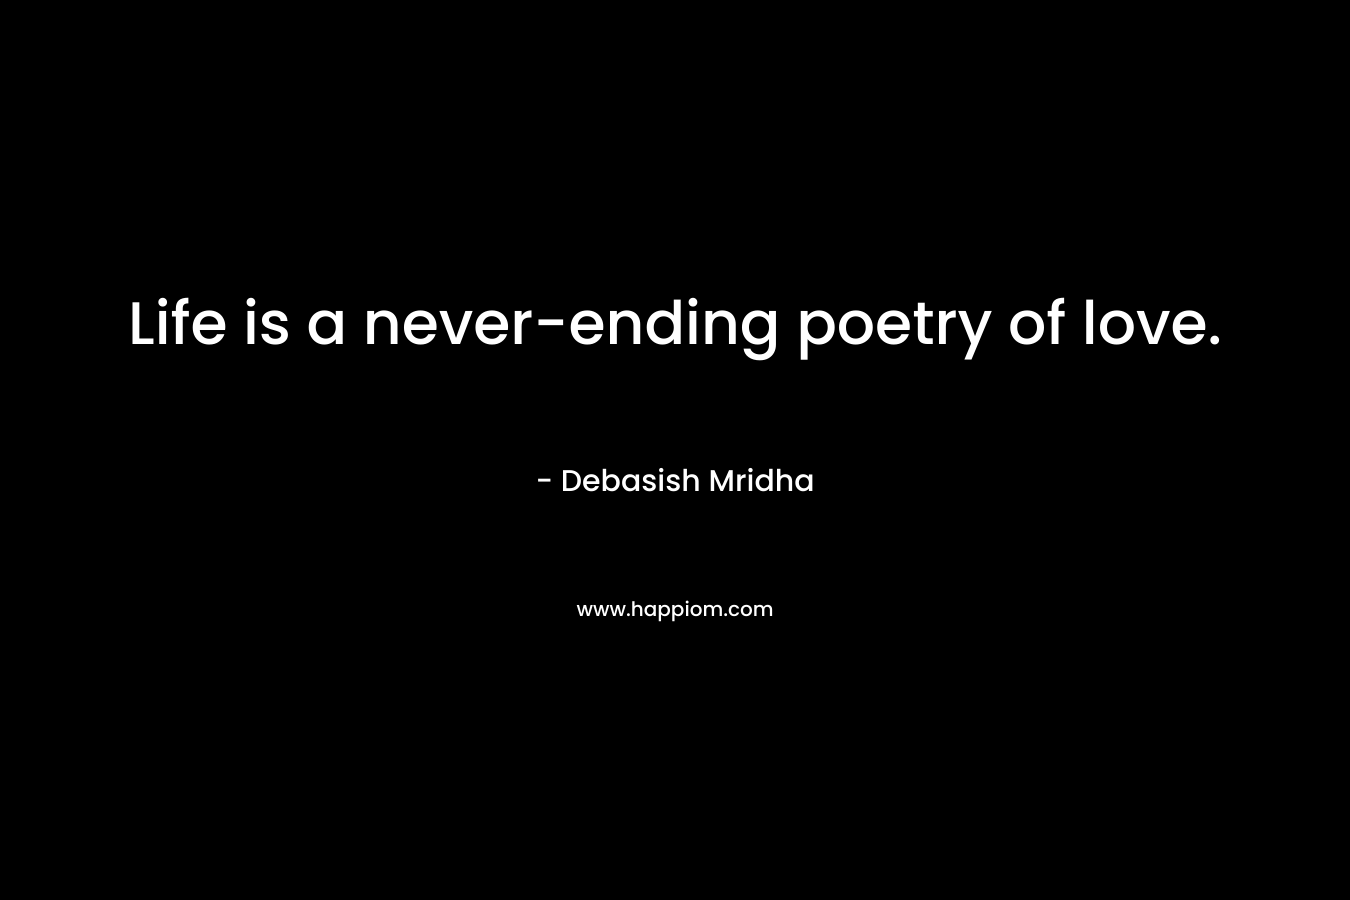 Life is a never-ending poetry of love. – Debasish Mridha